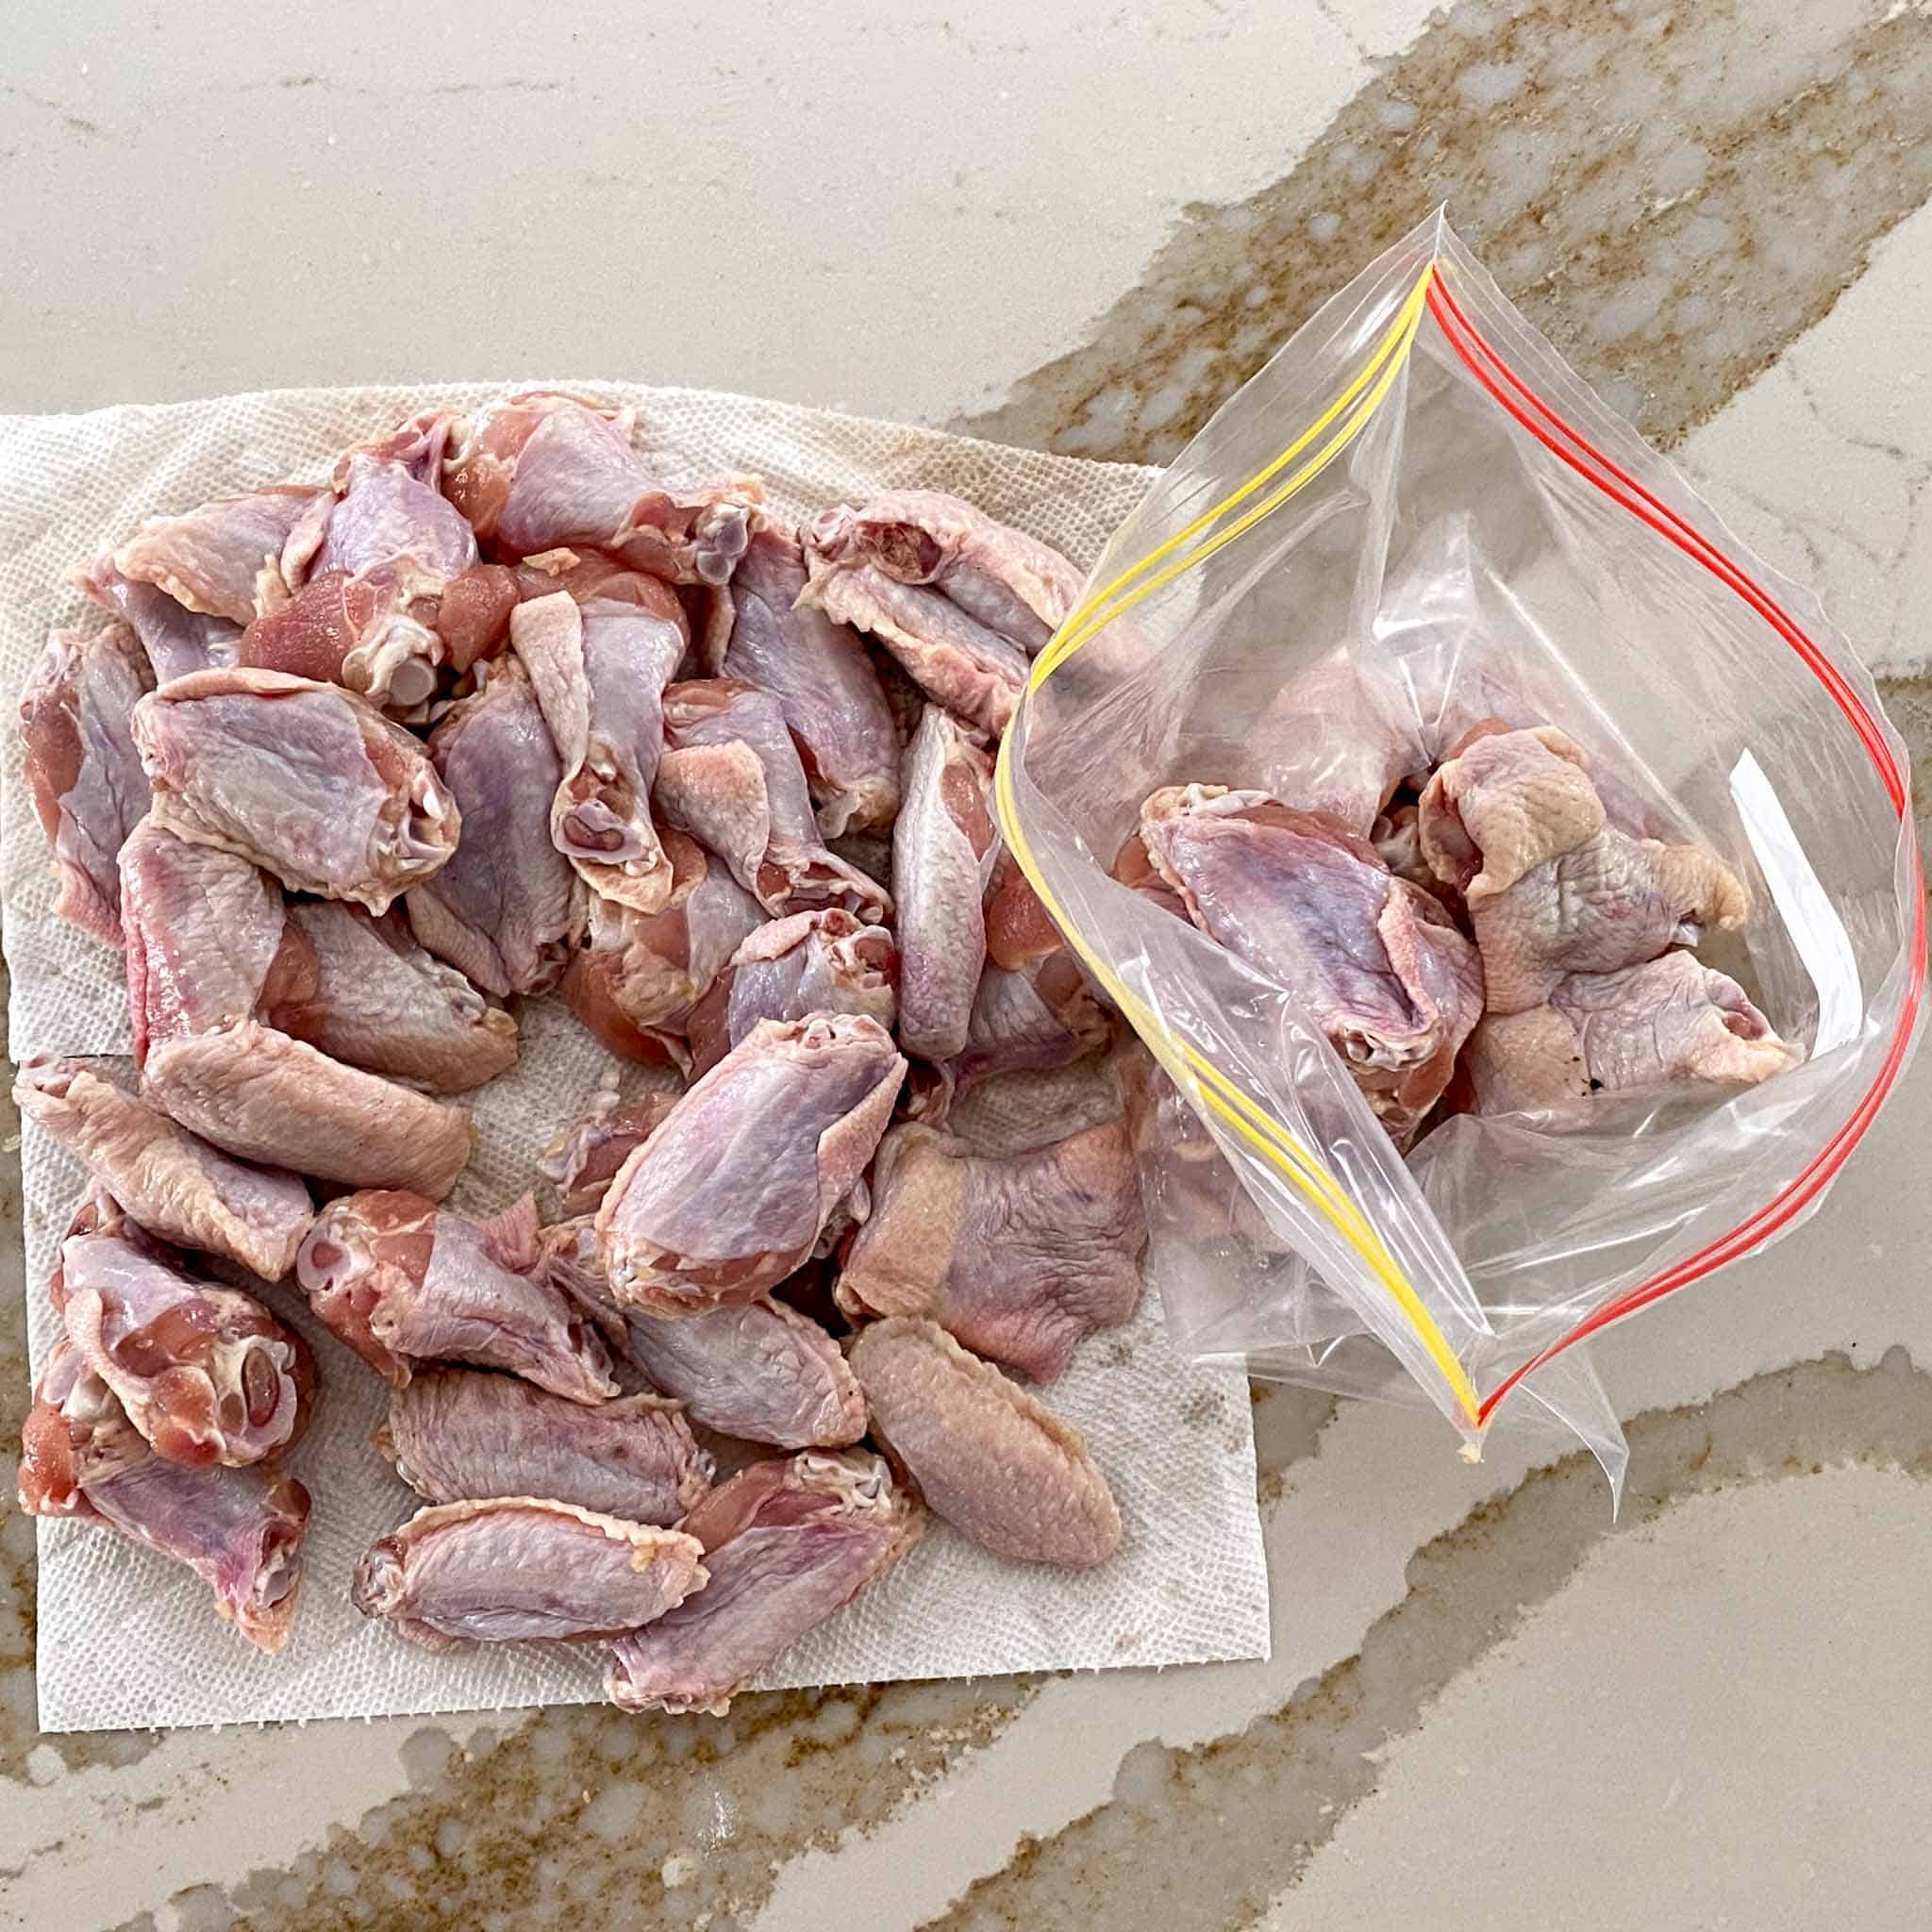 Raw chicken wings on a paper towel to dry.